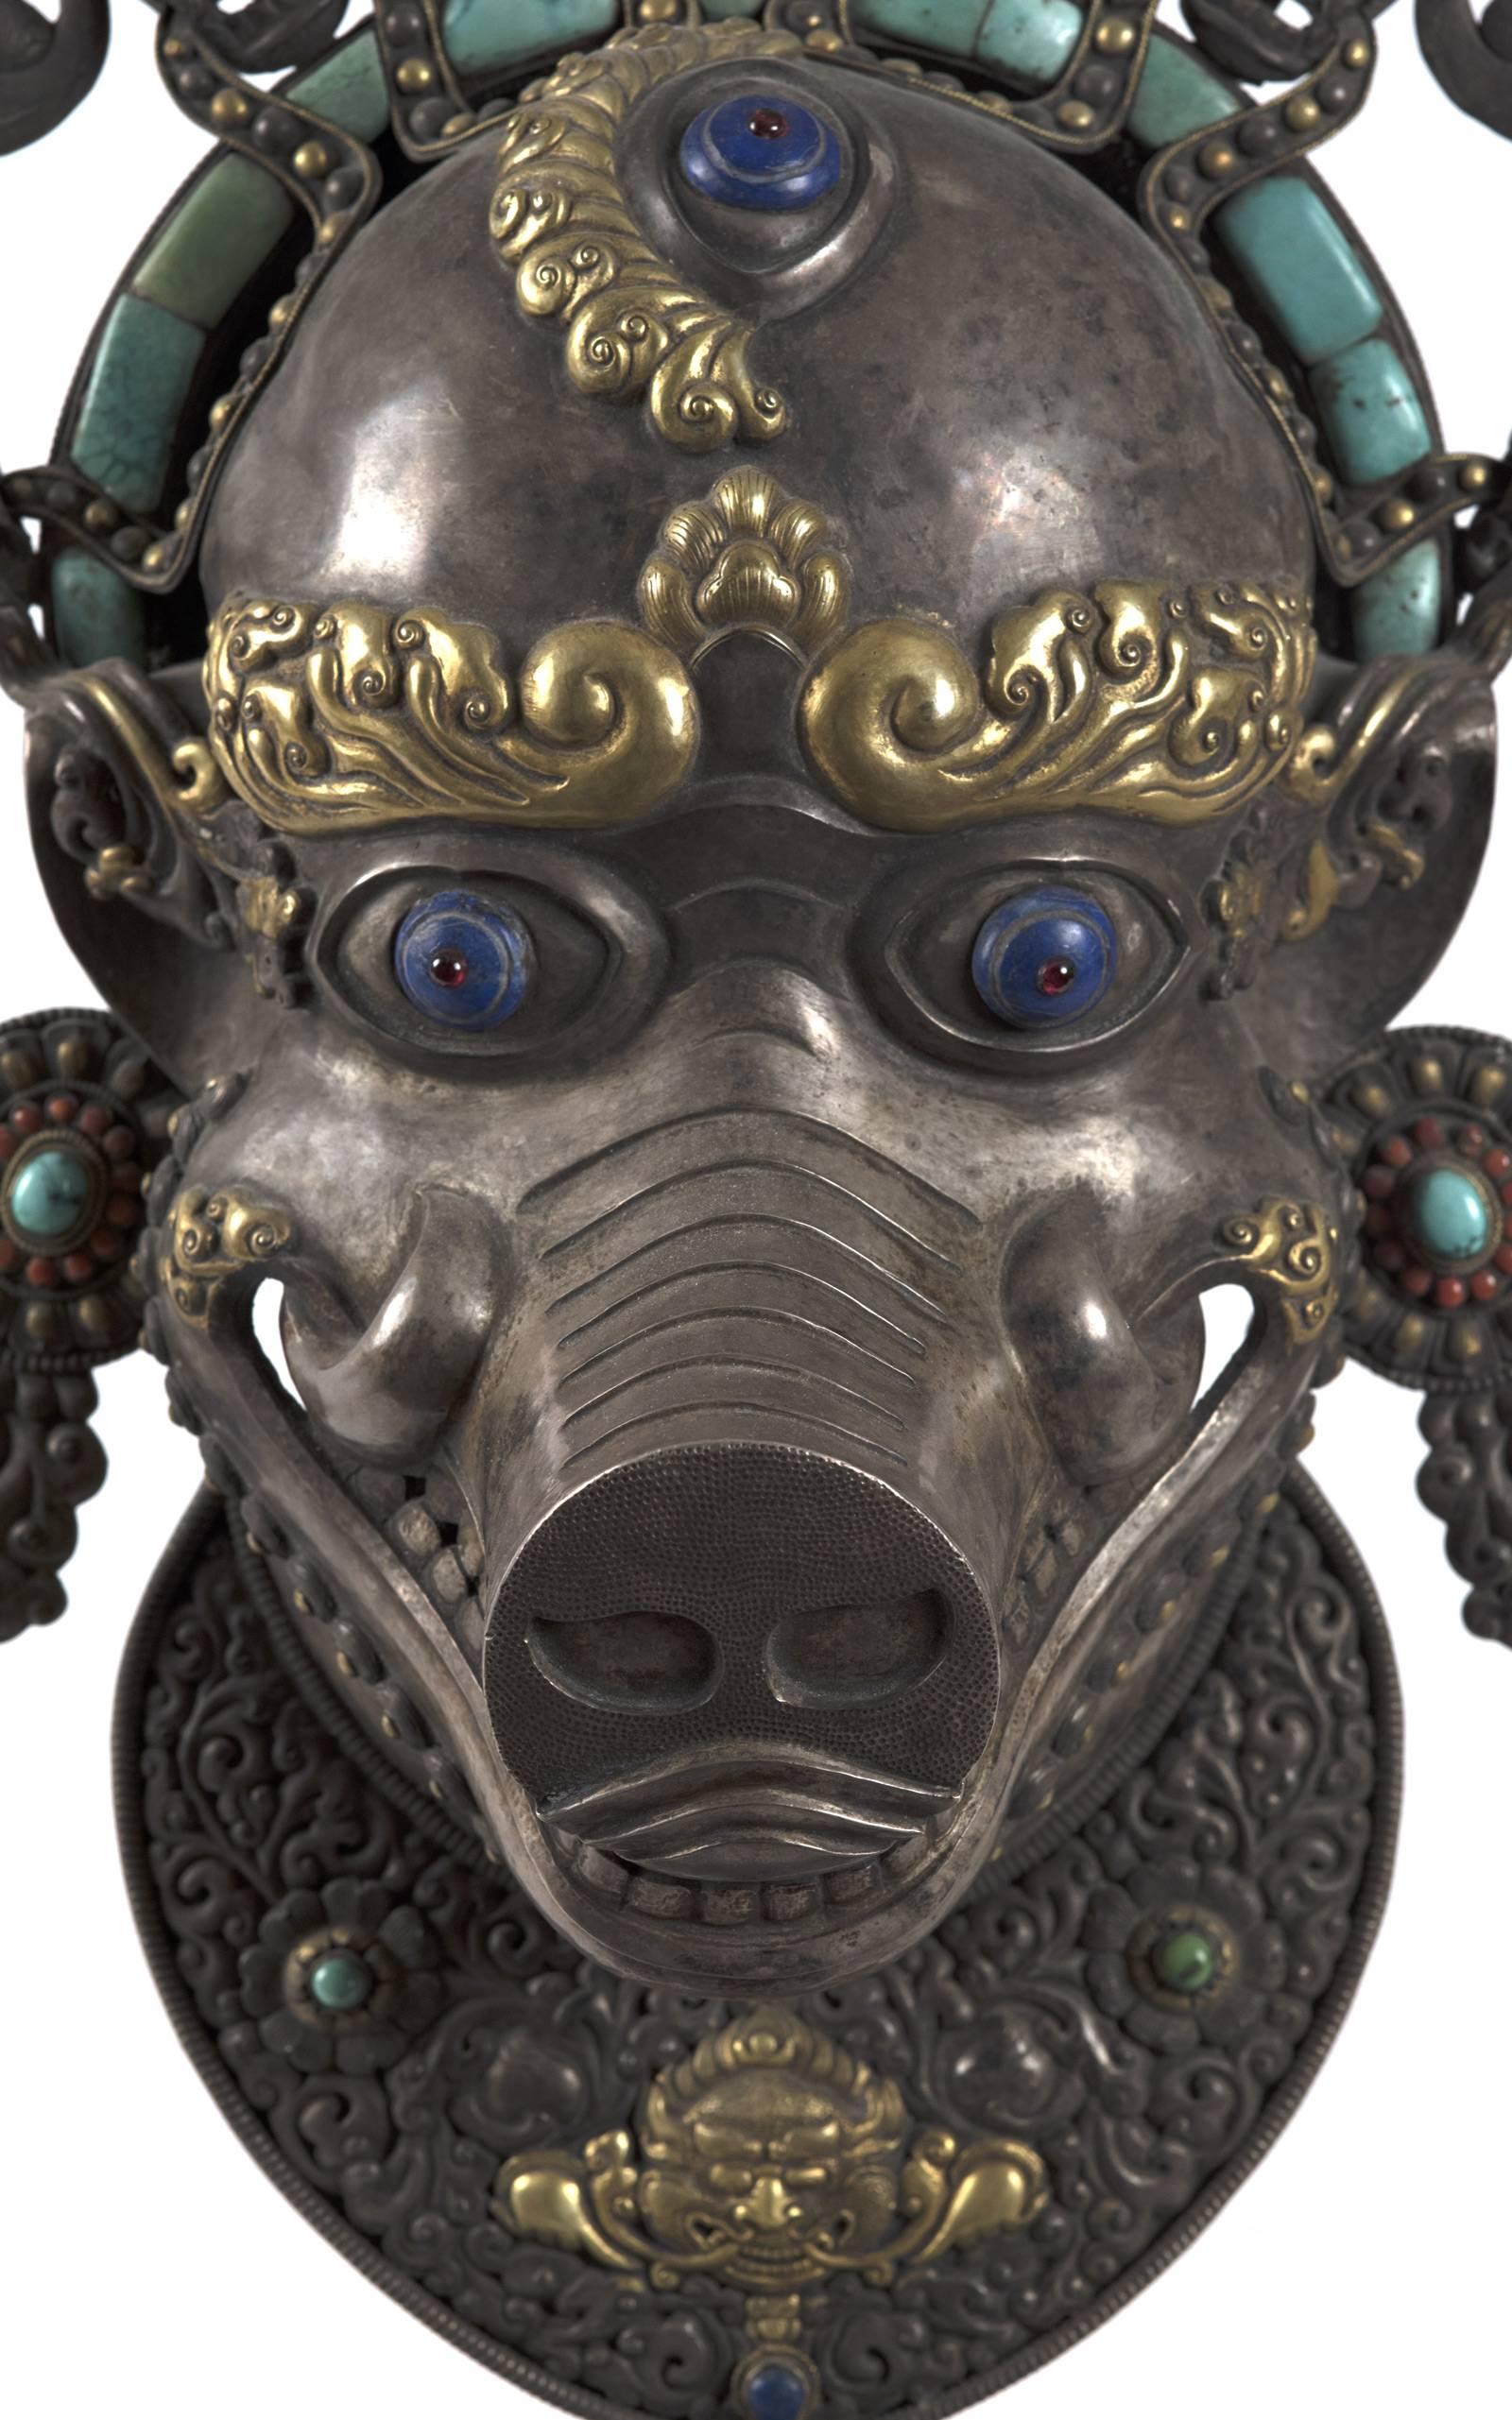 The temples of Kathmandu are guarded by four sow deities, who stand at each of the cardinal points. Dhumbarahi, the grey goddess, protects the north against all enemies, in particular disease. This authentic, nineteenth-century Nepalese statue of